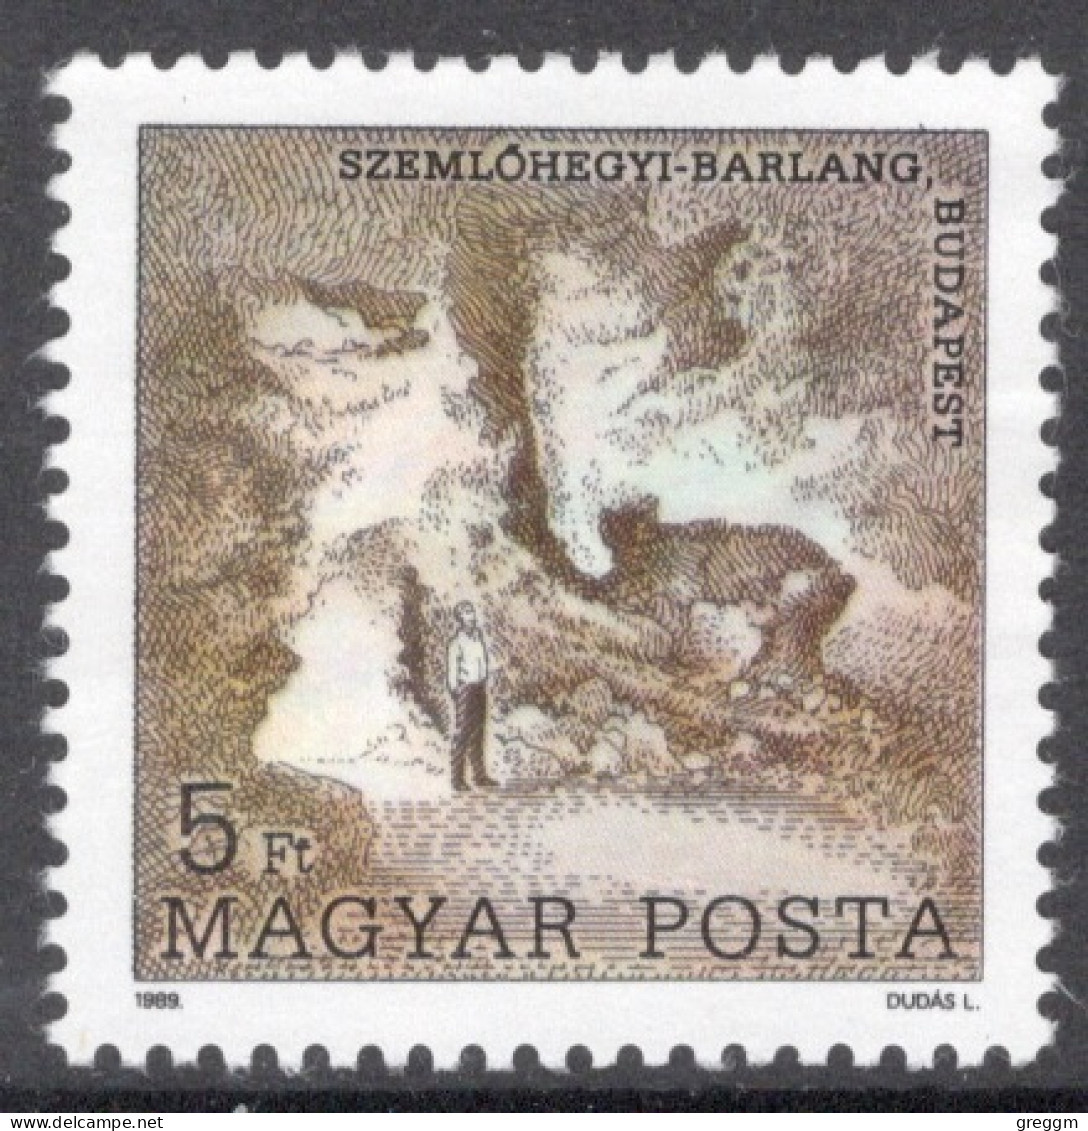 Hungary 1989 Single Stamp Celebrating World Speleology Congress In Fine Used - Used Stamps